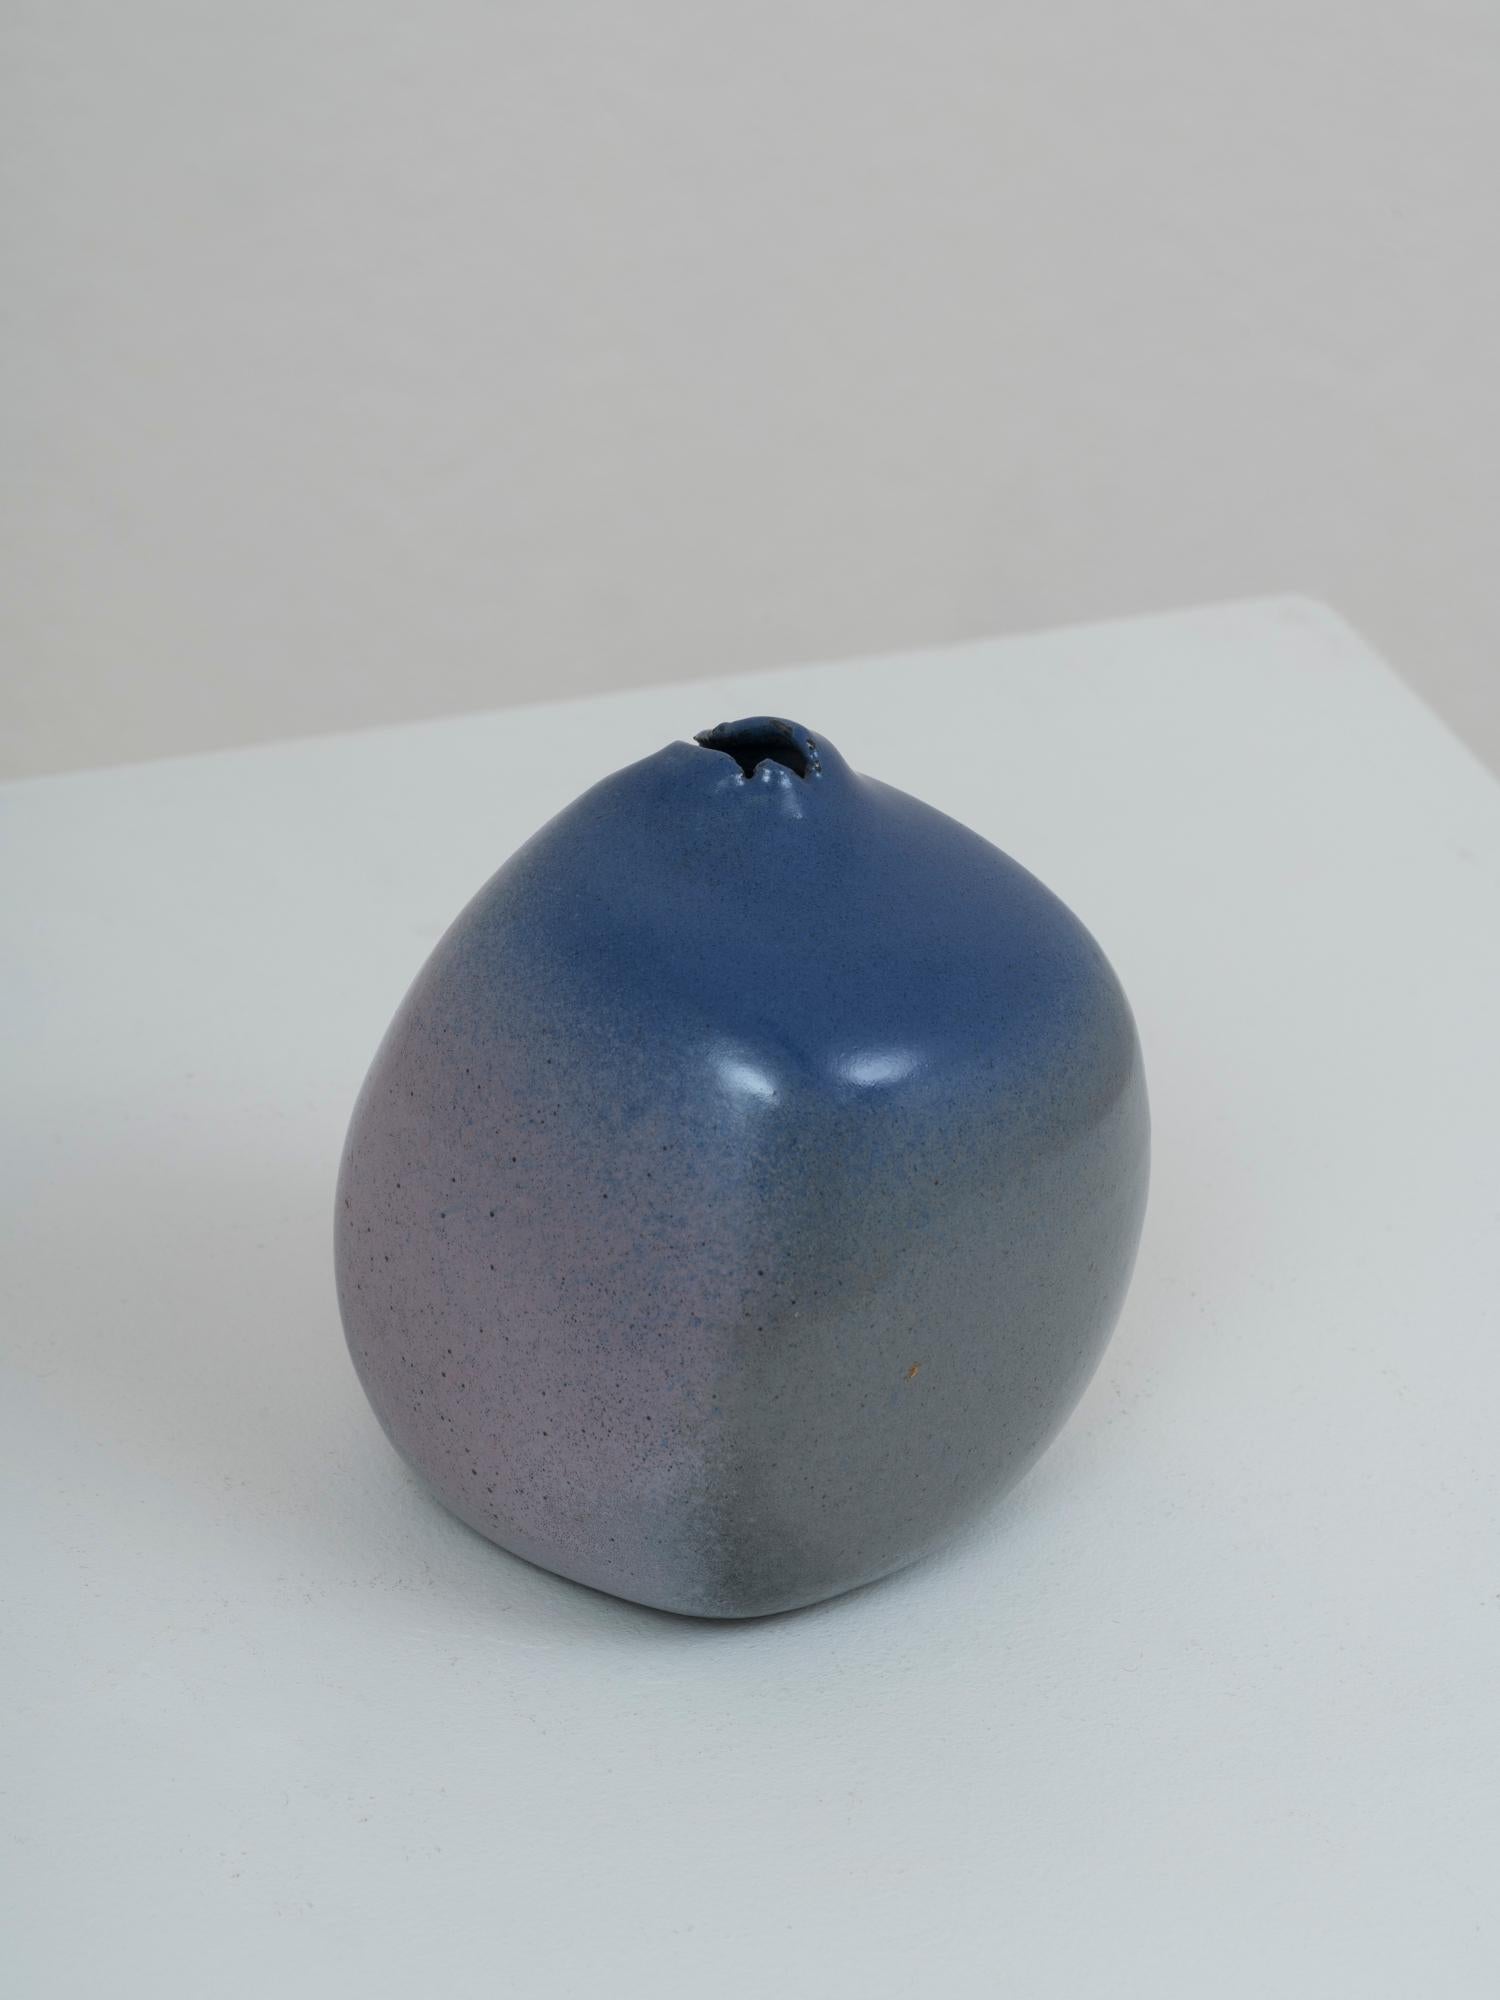 Italian Postmodern sculptural One-Off Ceramic Vase by Pino Castagna, 1990s For Sale